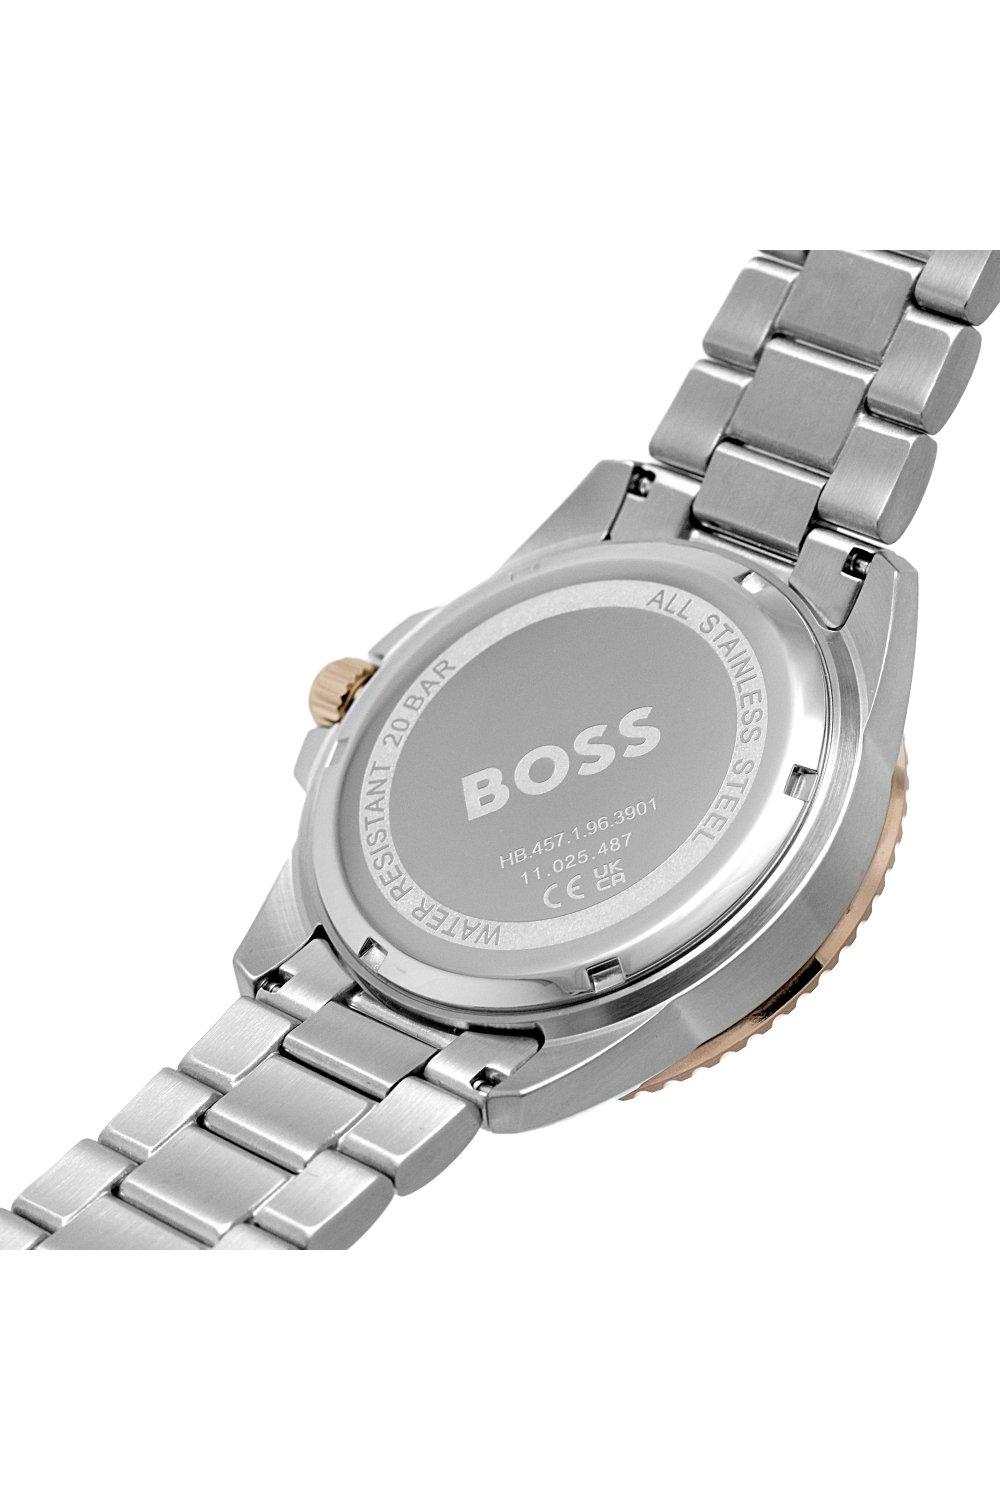 Watches | Ace Stainless Watch BOSS Steel 1514012 Fashion Quartz | - Analogue